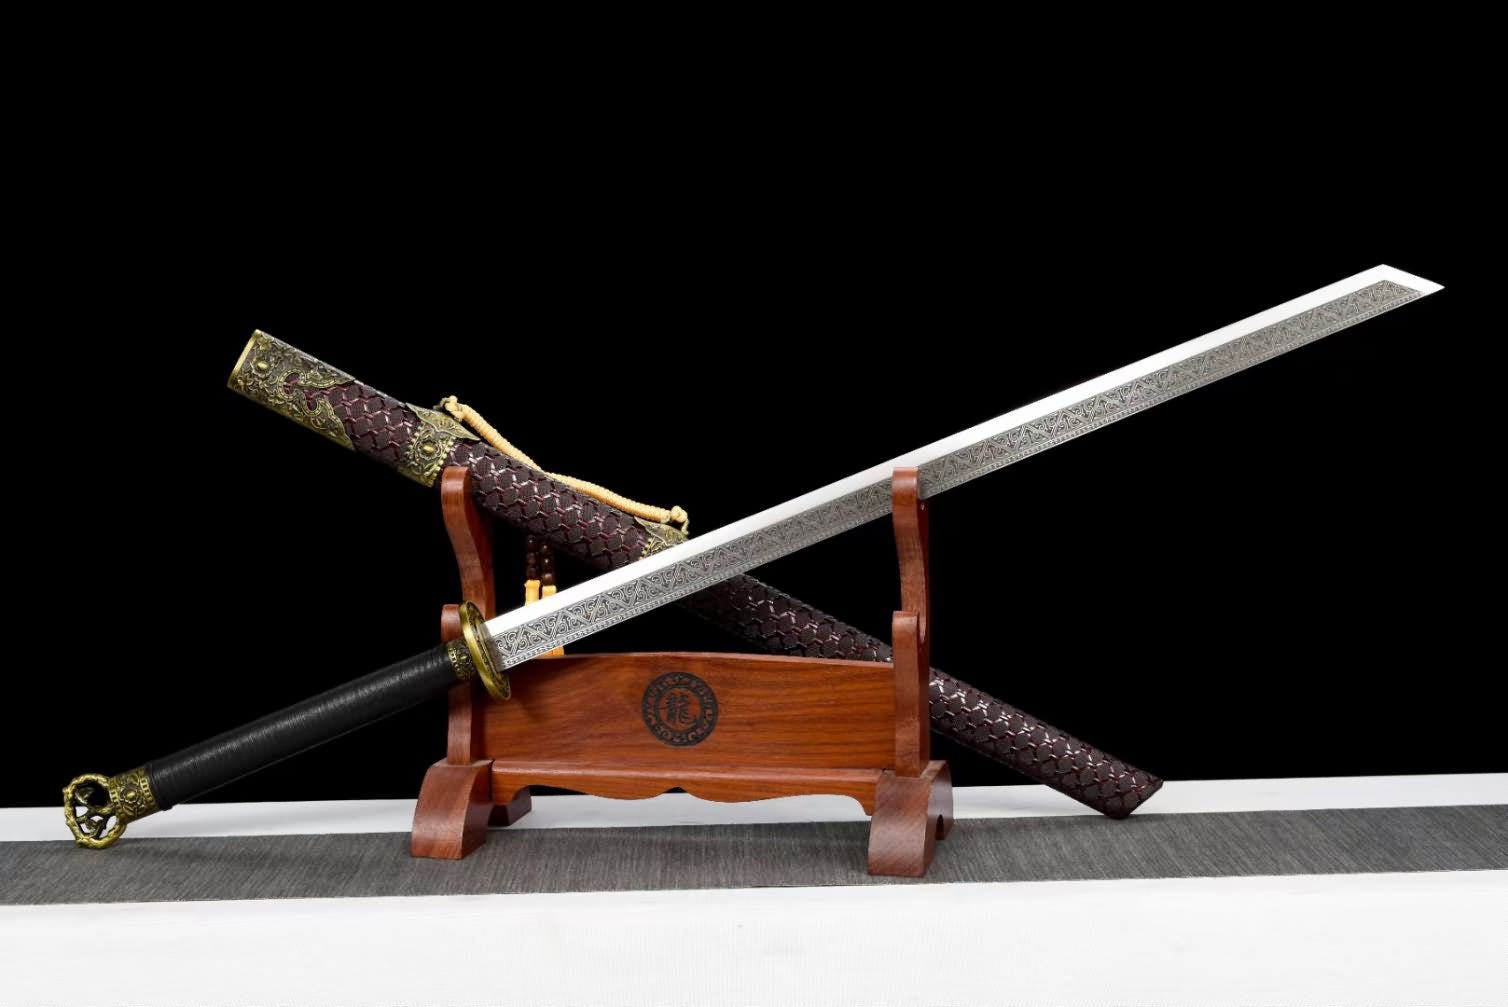 Chinese Tang Hengdao Sword-Forged Spring Steel Blade, Rosewood Scabbard